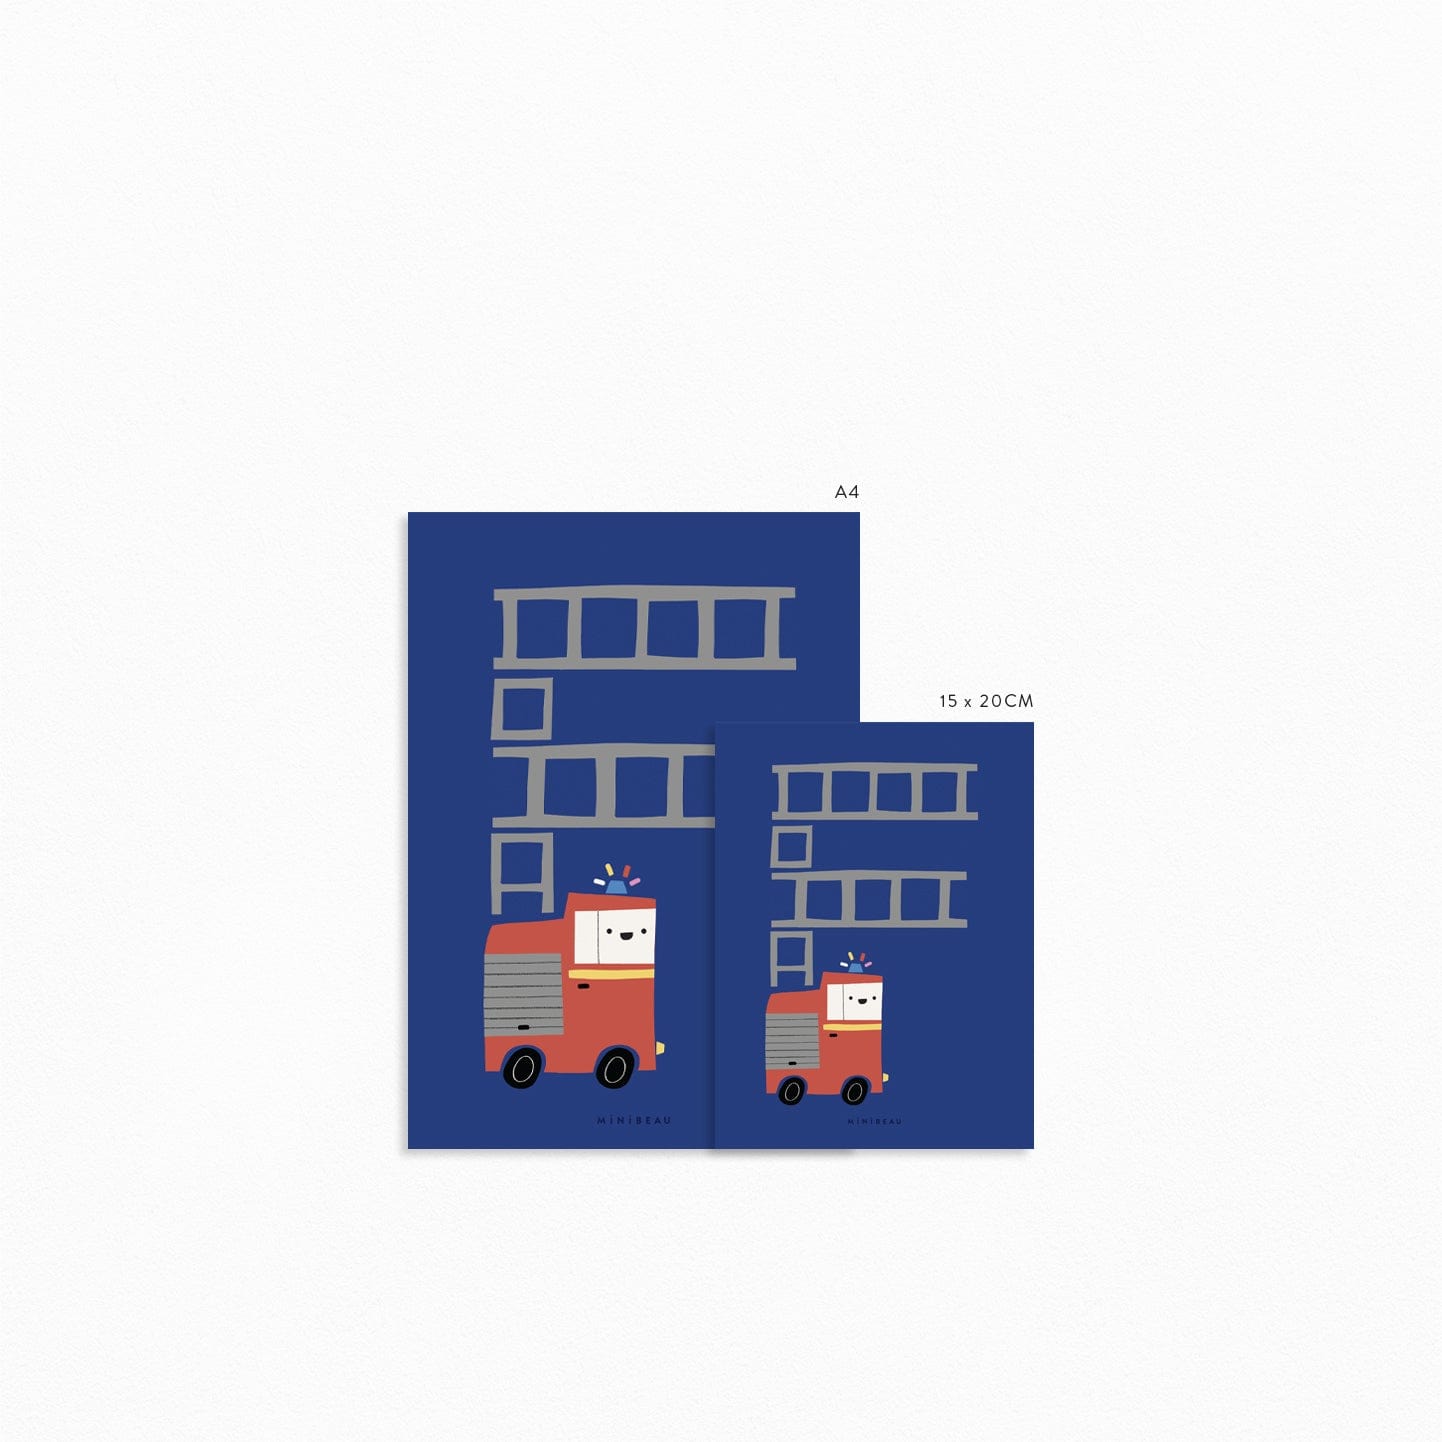 Image showing the available sizes for the Happy Alphabet 'f' art print. Our Happy Alphabet 'F' Art Print shows a red fire engine with its ladder raised in the shape of the letter F, with its blue light flashing on a dark blue background.